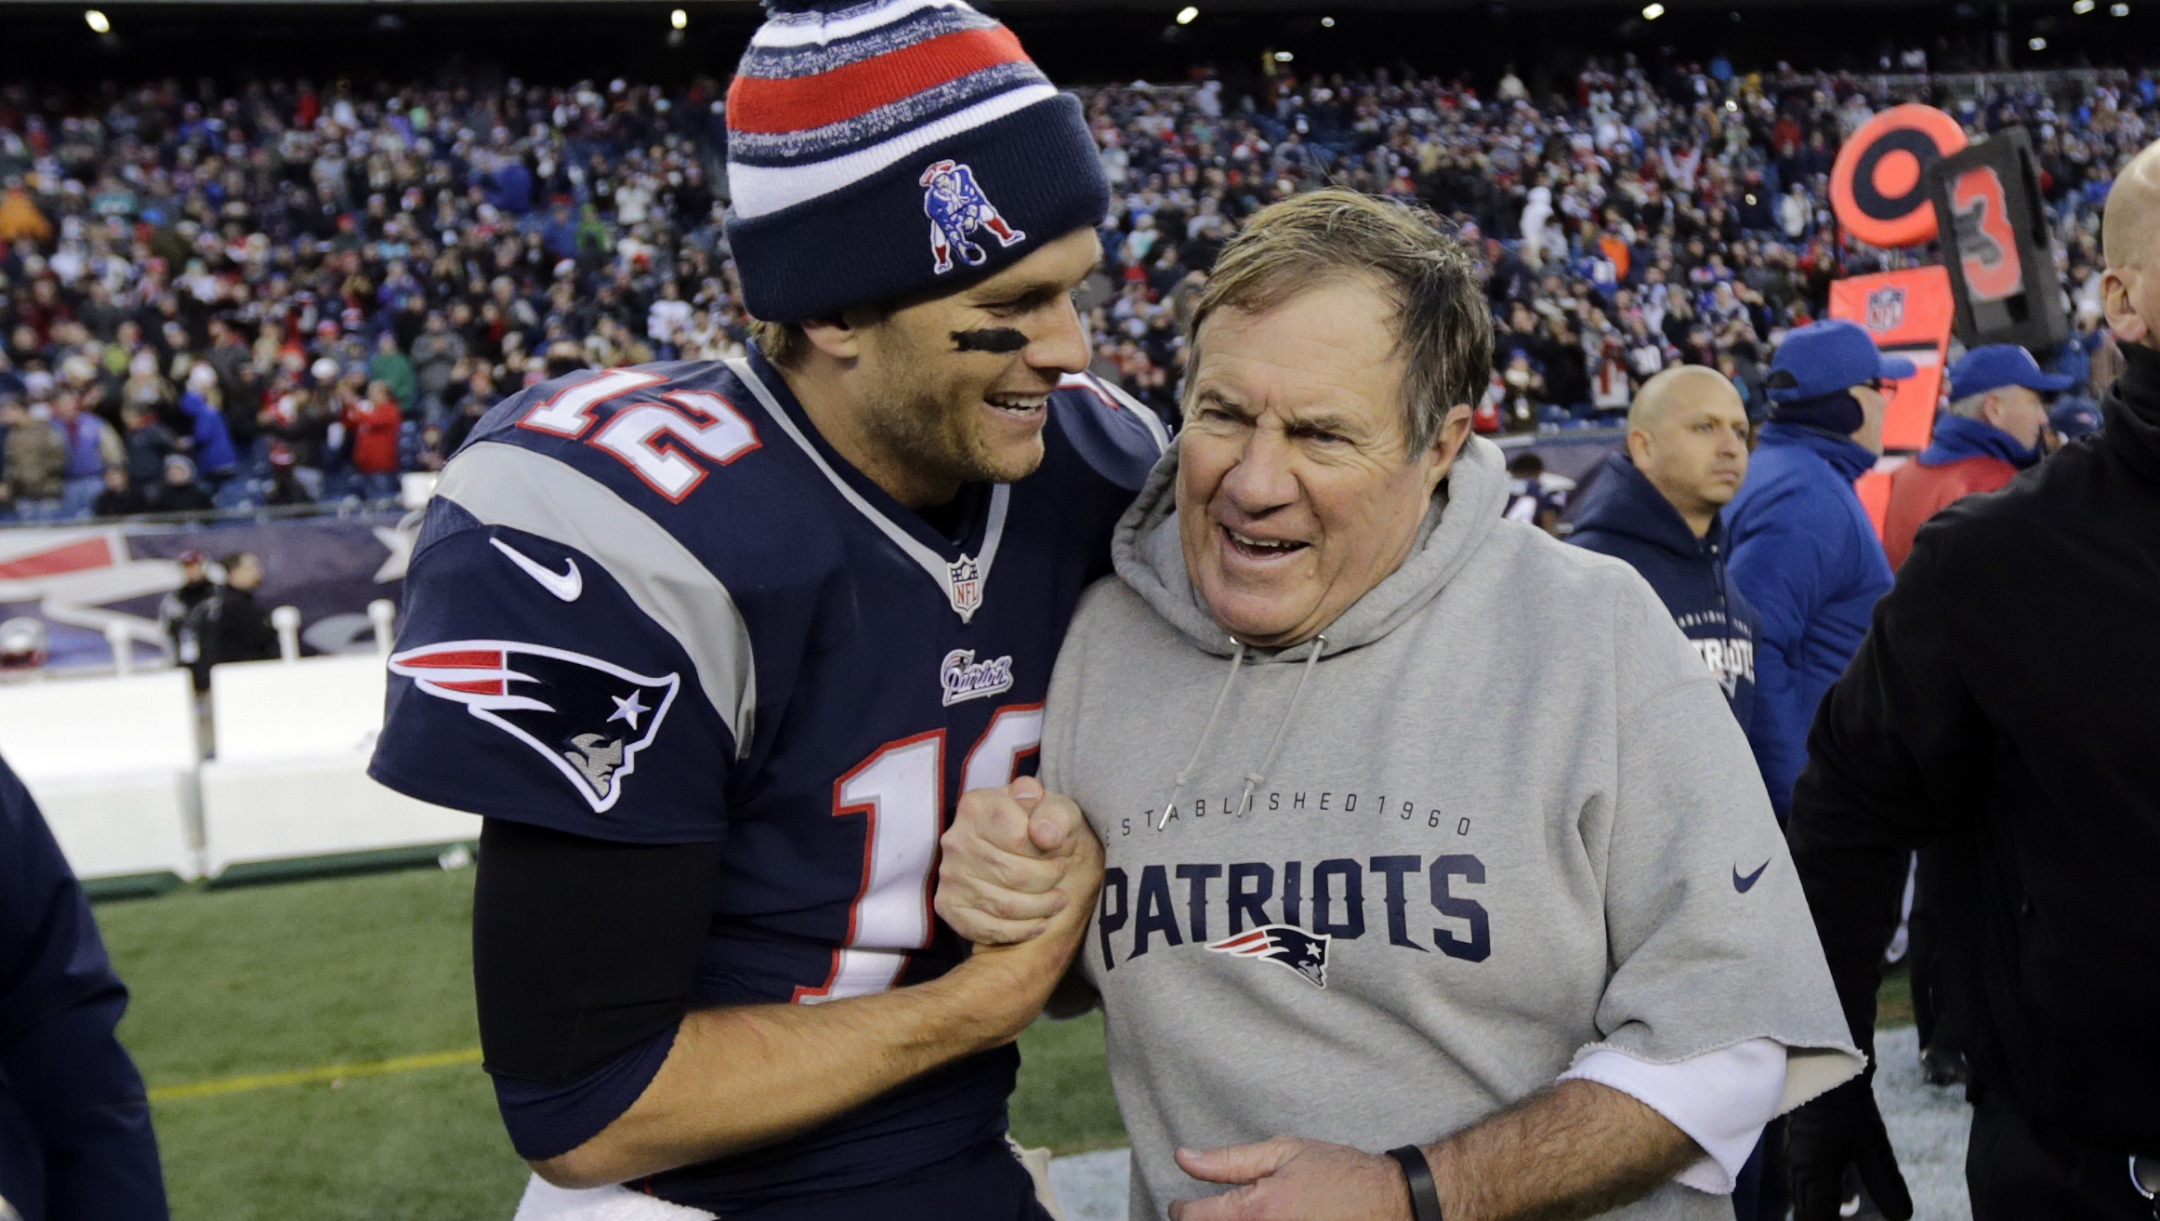 FILE - New England Patriots quarterback Tom Brady, left, celebrates with head coach Bill Belichick after defeating the Miami Dolphins 41-13 in an NFL football game Sunday, Dec. 14, 2014, in Foxborough, Mass. Six-time NFL champion Bill Belichick has agreed to part ways as the coach of the New England Patriots on Thursday, Jan. 11, 2024, bringing an end to his 24-year tenure as the architect of the most decorated dynasty of the league?s Super Bowl era, a source told the Associated Press on the condition of anonymity because it has not yet been announced.  (AP Photo/Charles Krupa, File)